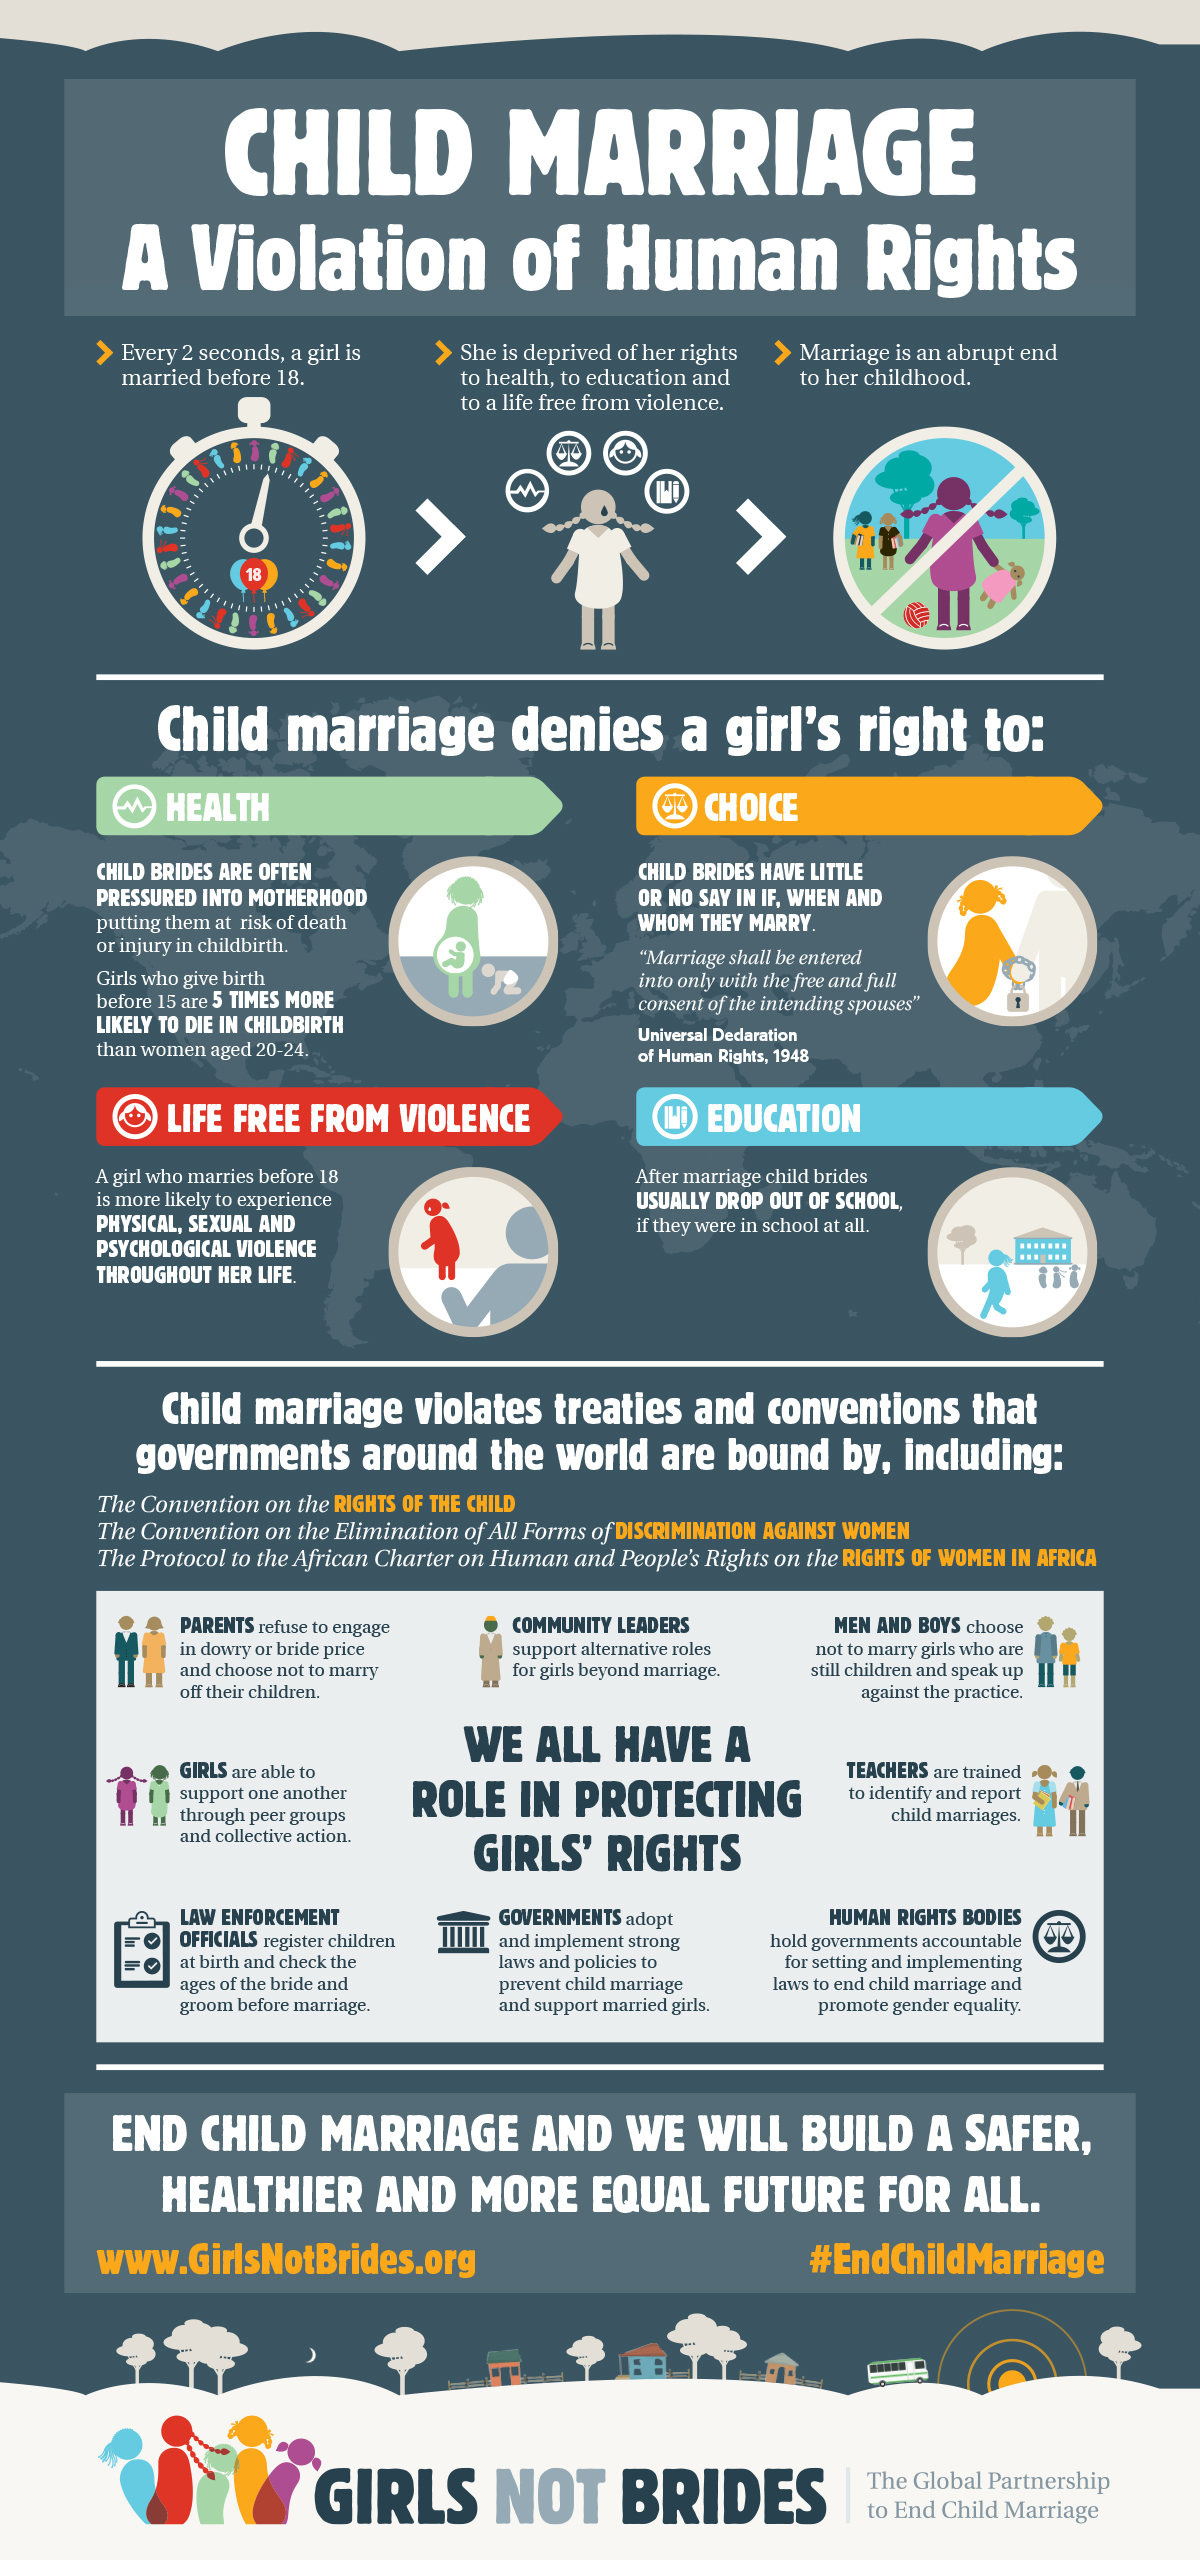 3 Ways Girls' Education Can Help End Child Marriage